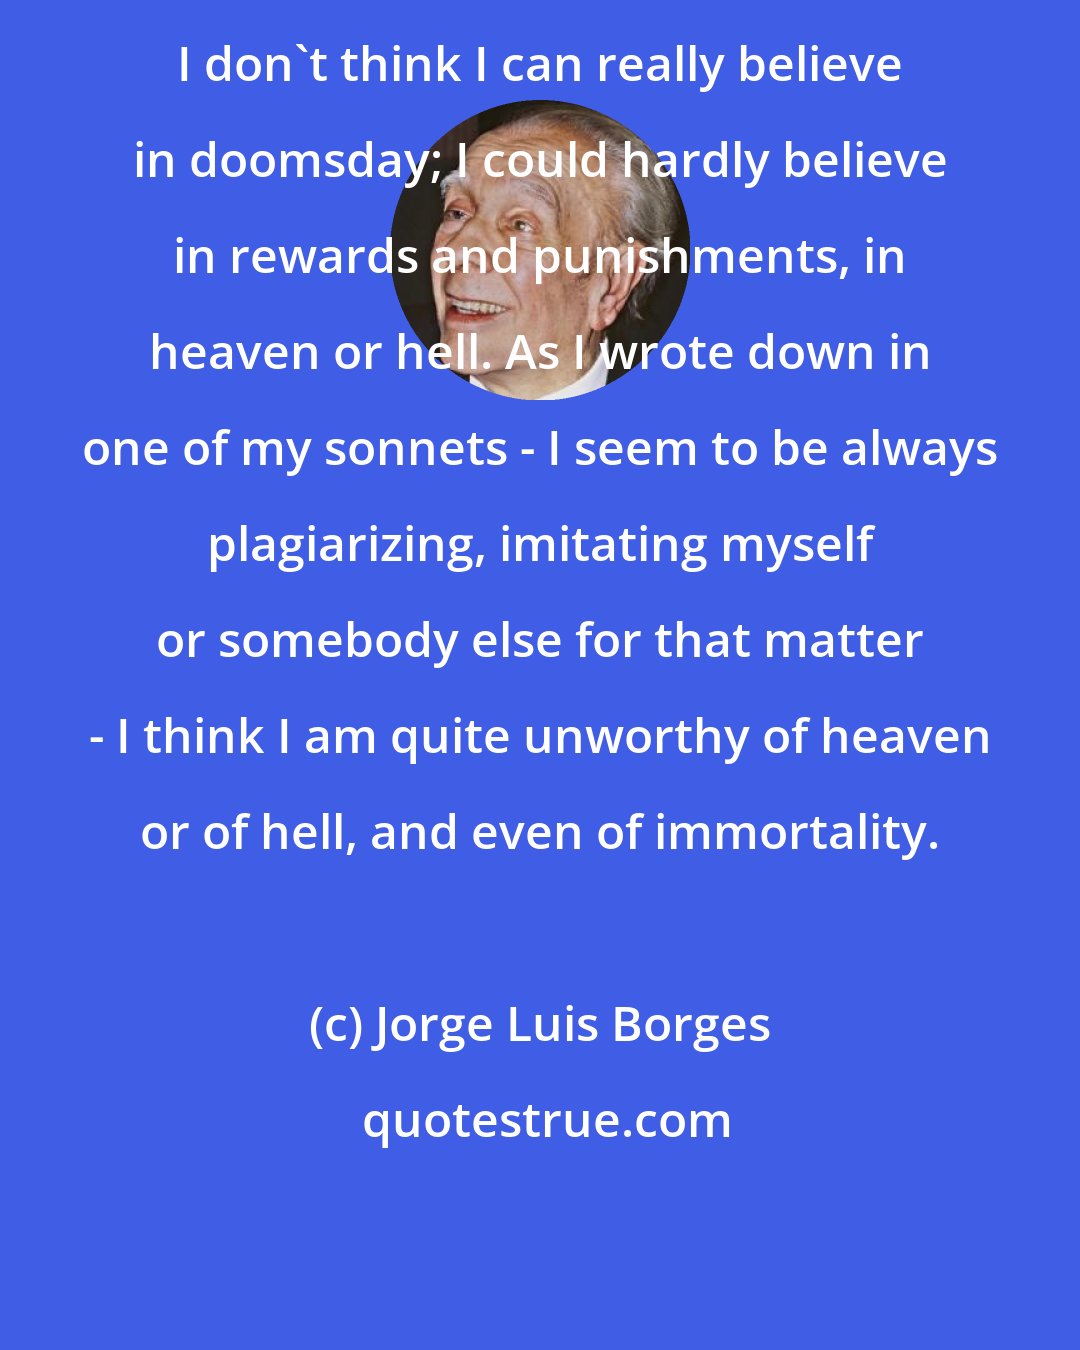 Jorge Luis Borges: I don't think I can really believe in doomsday; I could hardly believe in rewards and punishments, in heaven or hell. As I wrote down in one of my sonnets - I seem to be always plagiarizing, imitating myself or somebody else for that matter - I think I am quite unworthy of heaven or of hell, and even of immortality.